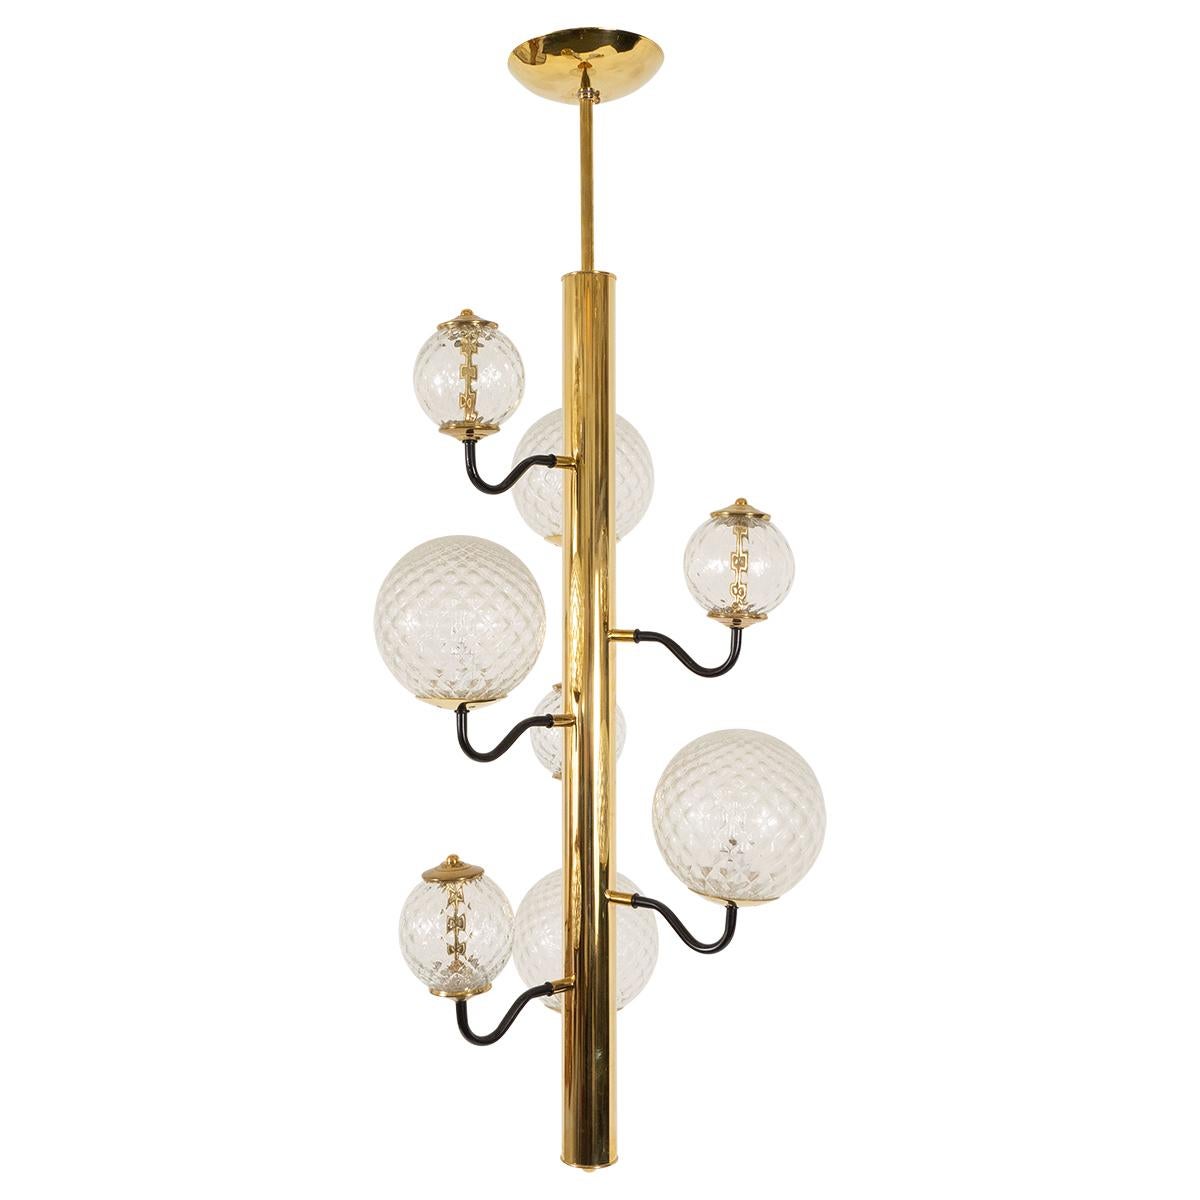 Columnar brass chandelier featuring textured glass globes on black curvilinear arms.